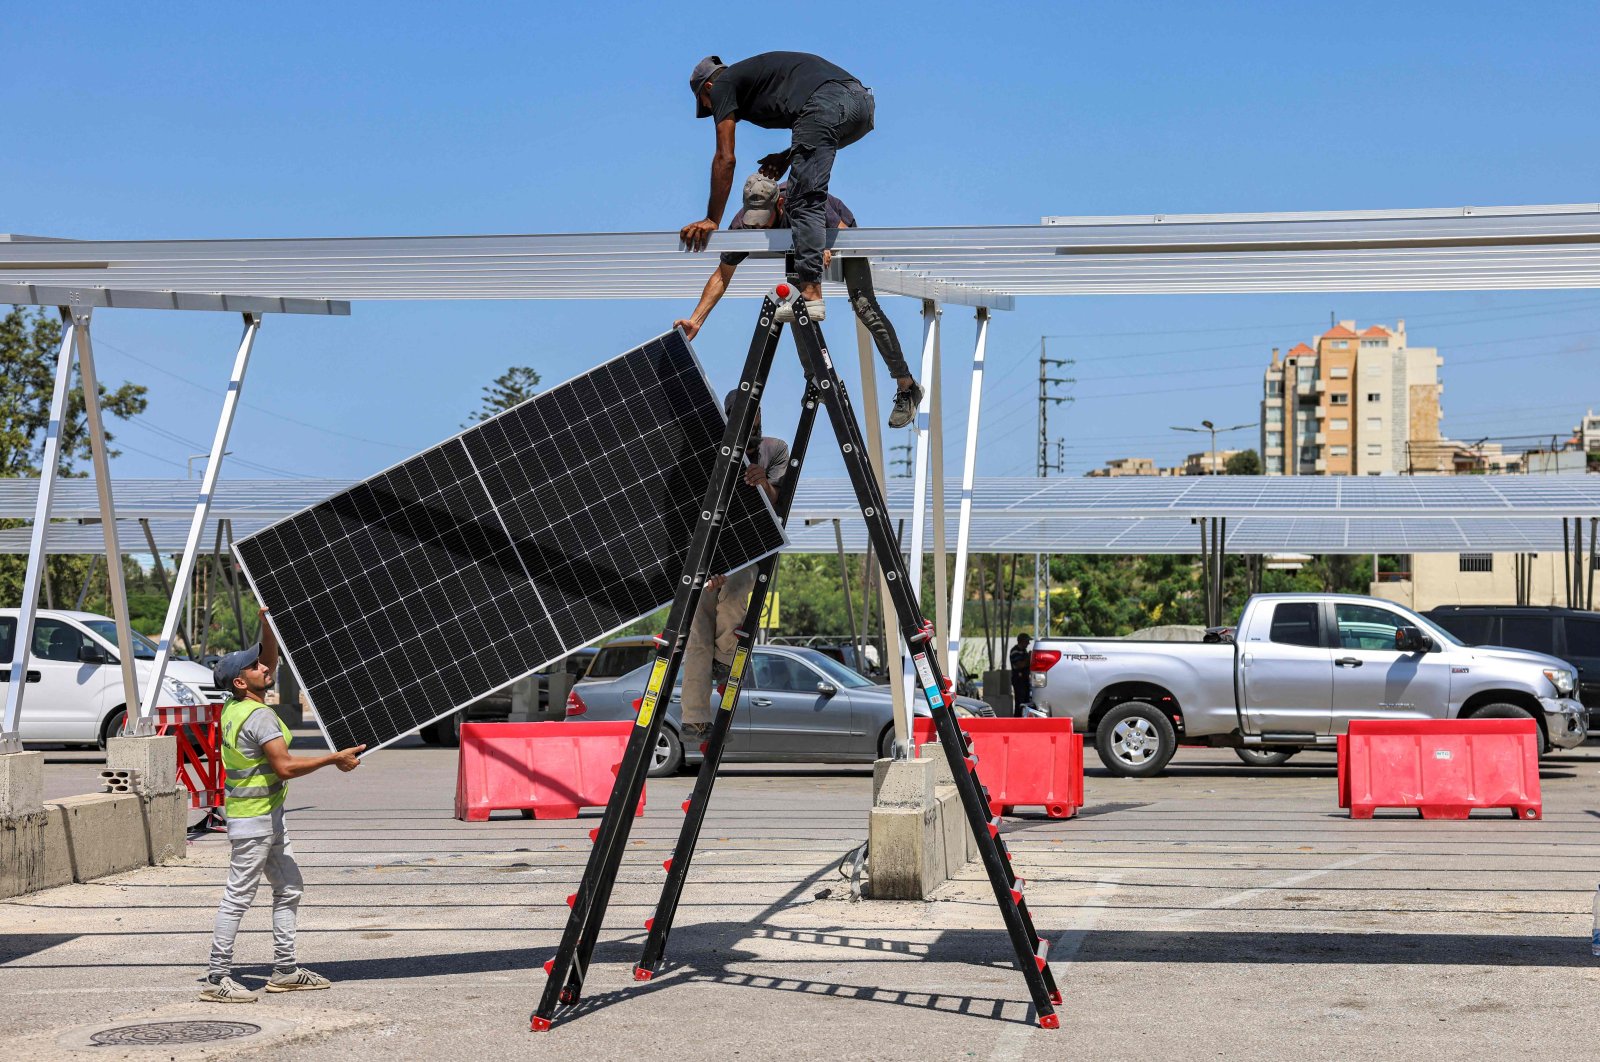 Workers install new solar panels that will also serve as shade for vehicles in the car park of a shopping mall in Byblos, northern Lebanon, Aug. 26, 2022. (AFP Photo)